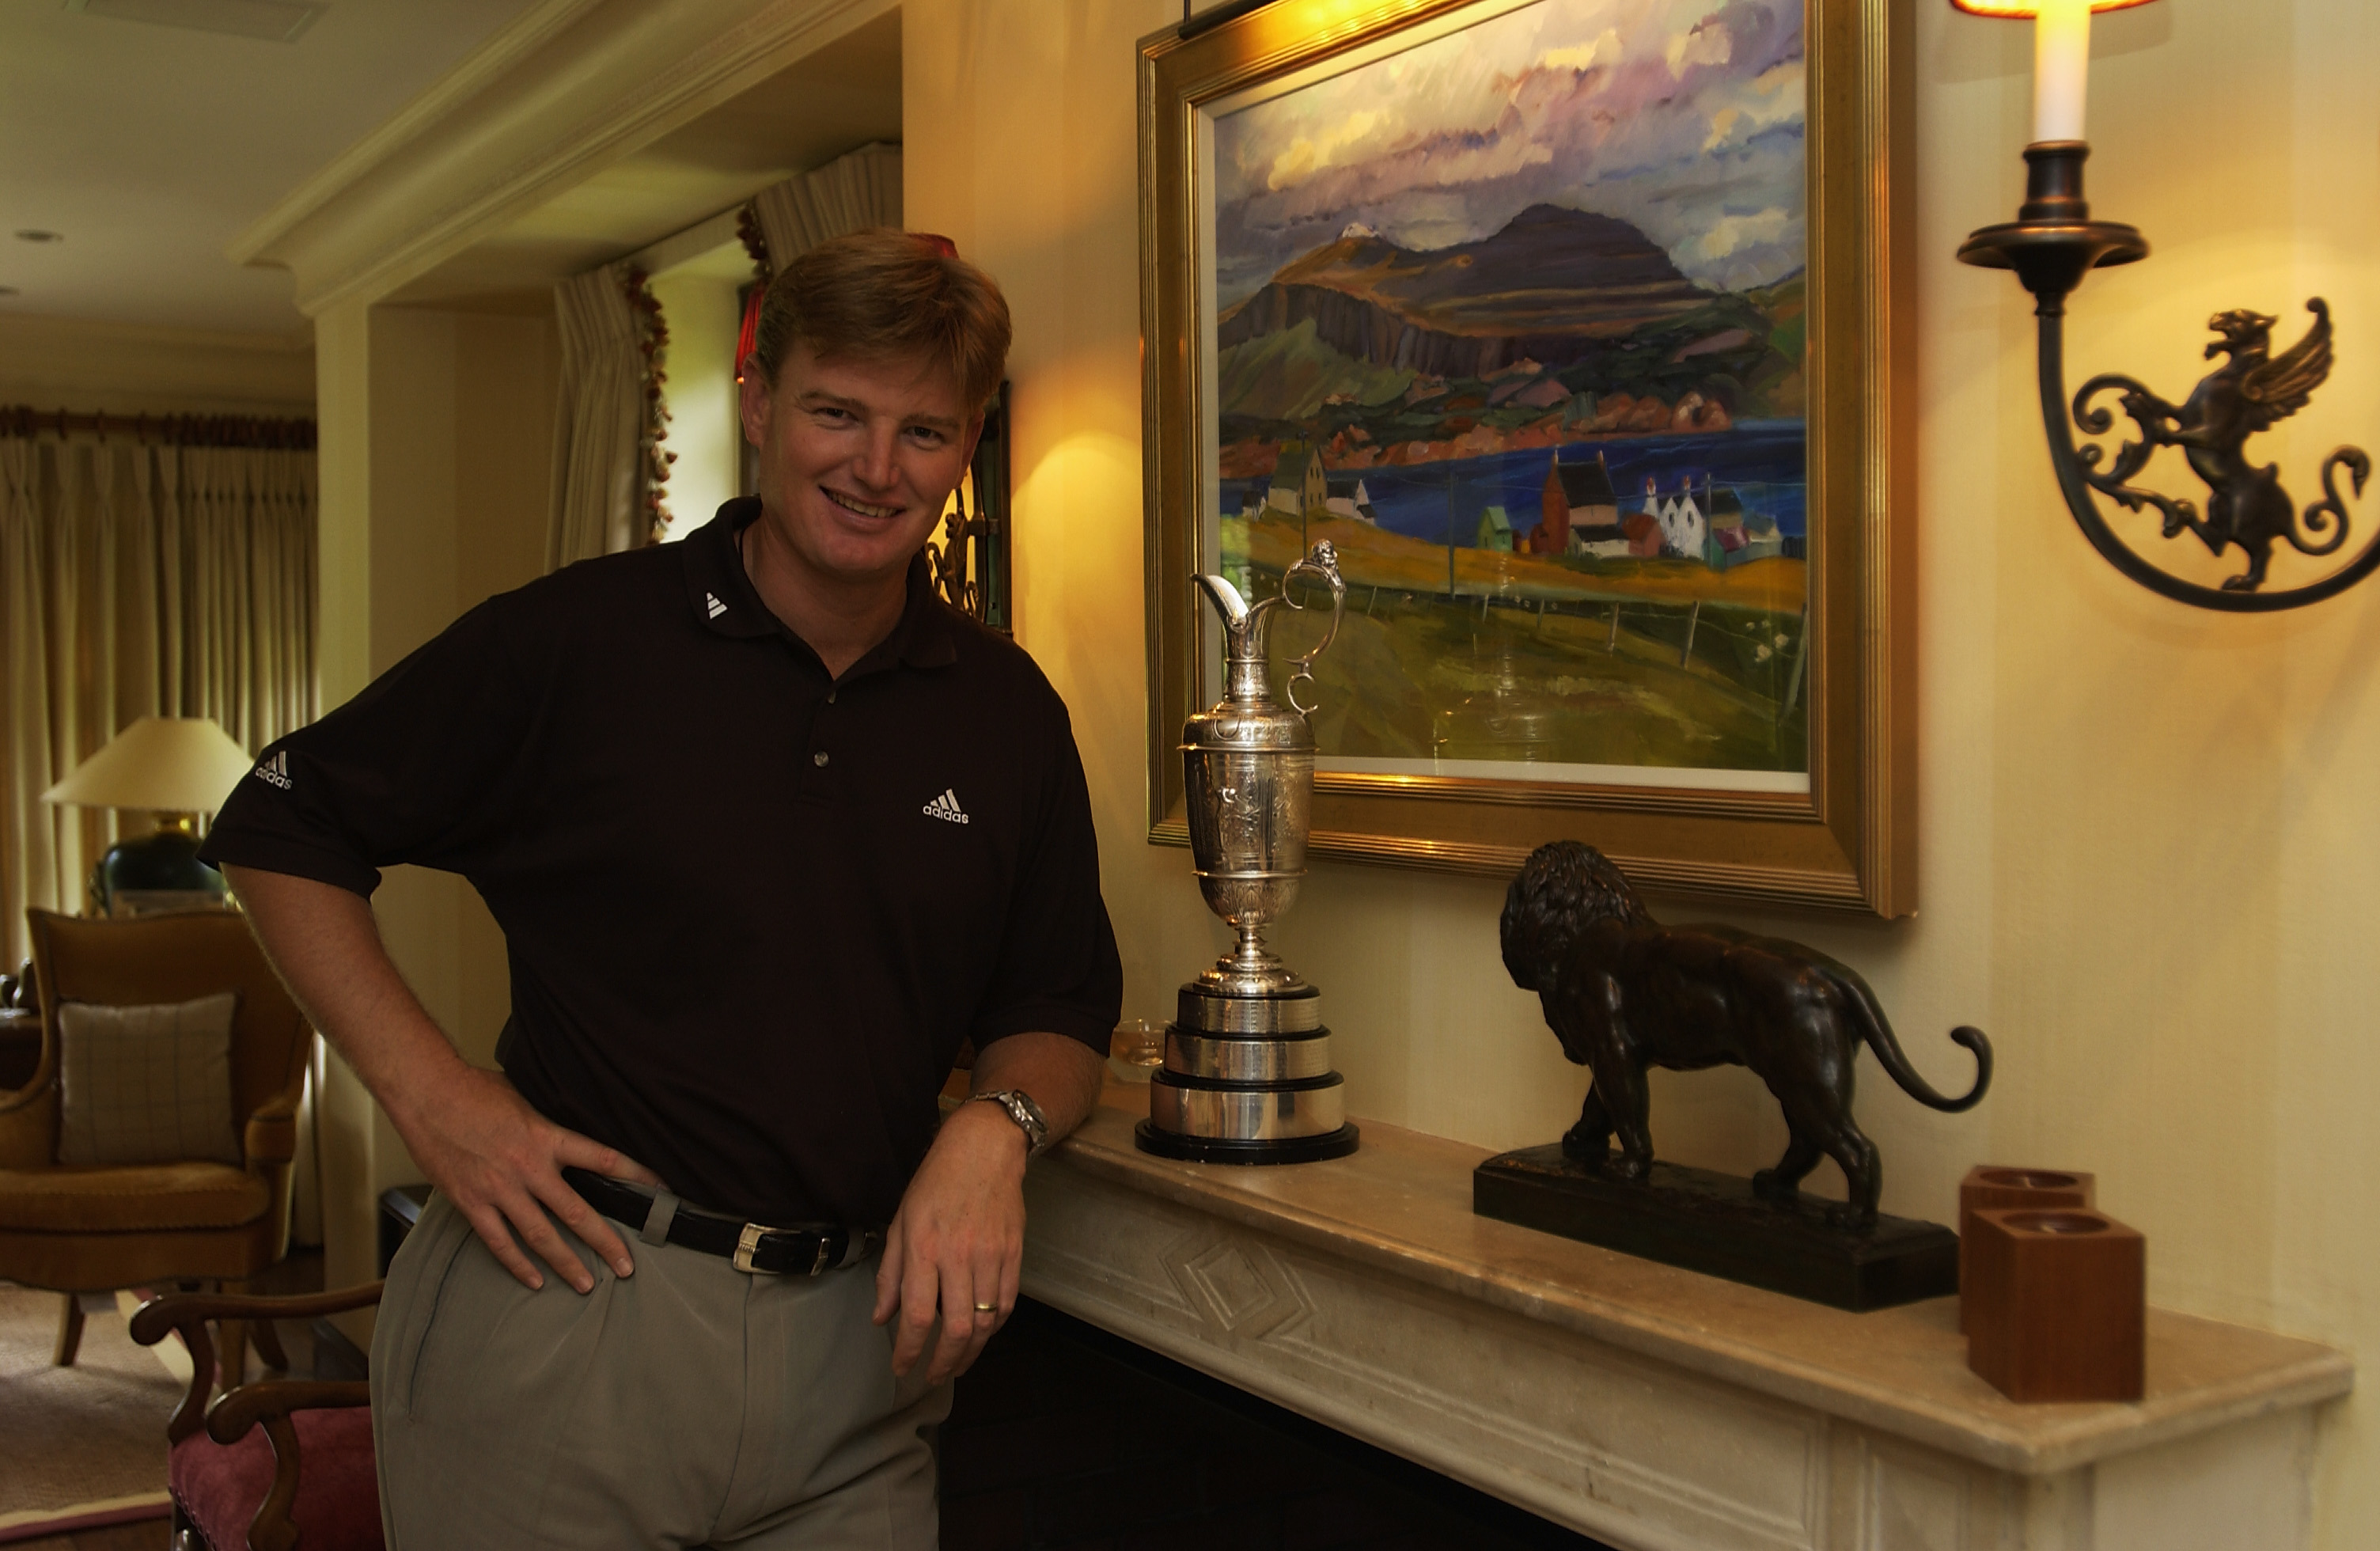 SURREY - JULY 26:  Ernie Els of South Africa the 2002 Open Champion with the Open trophy at his home in Surrey, England  on July 26, 2002. (Photo by Stephen Munday/Getty Images)